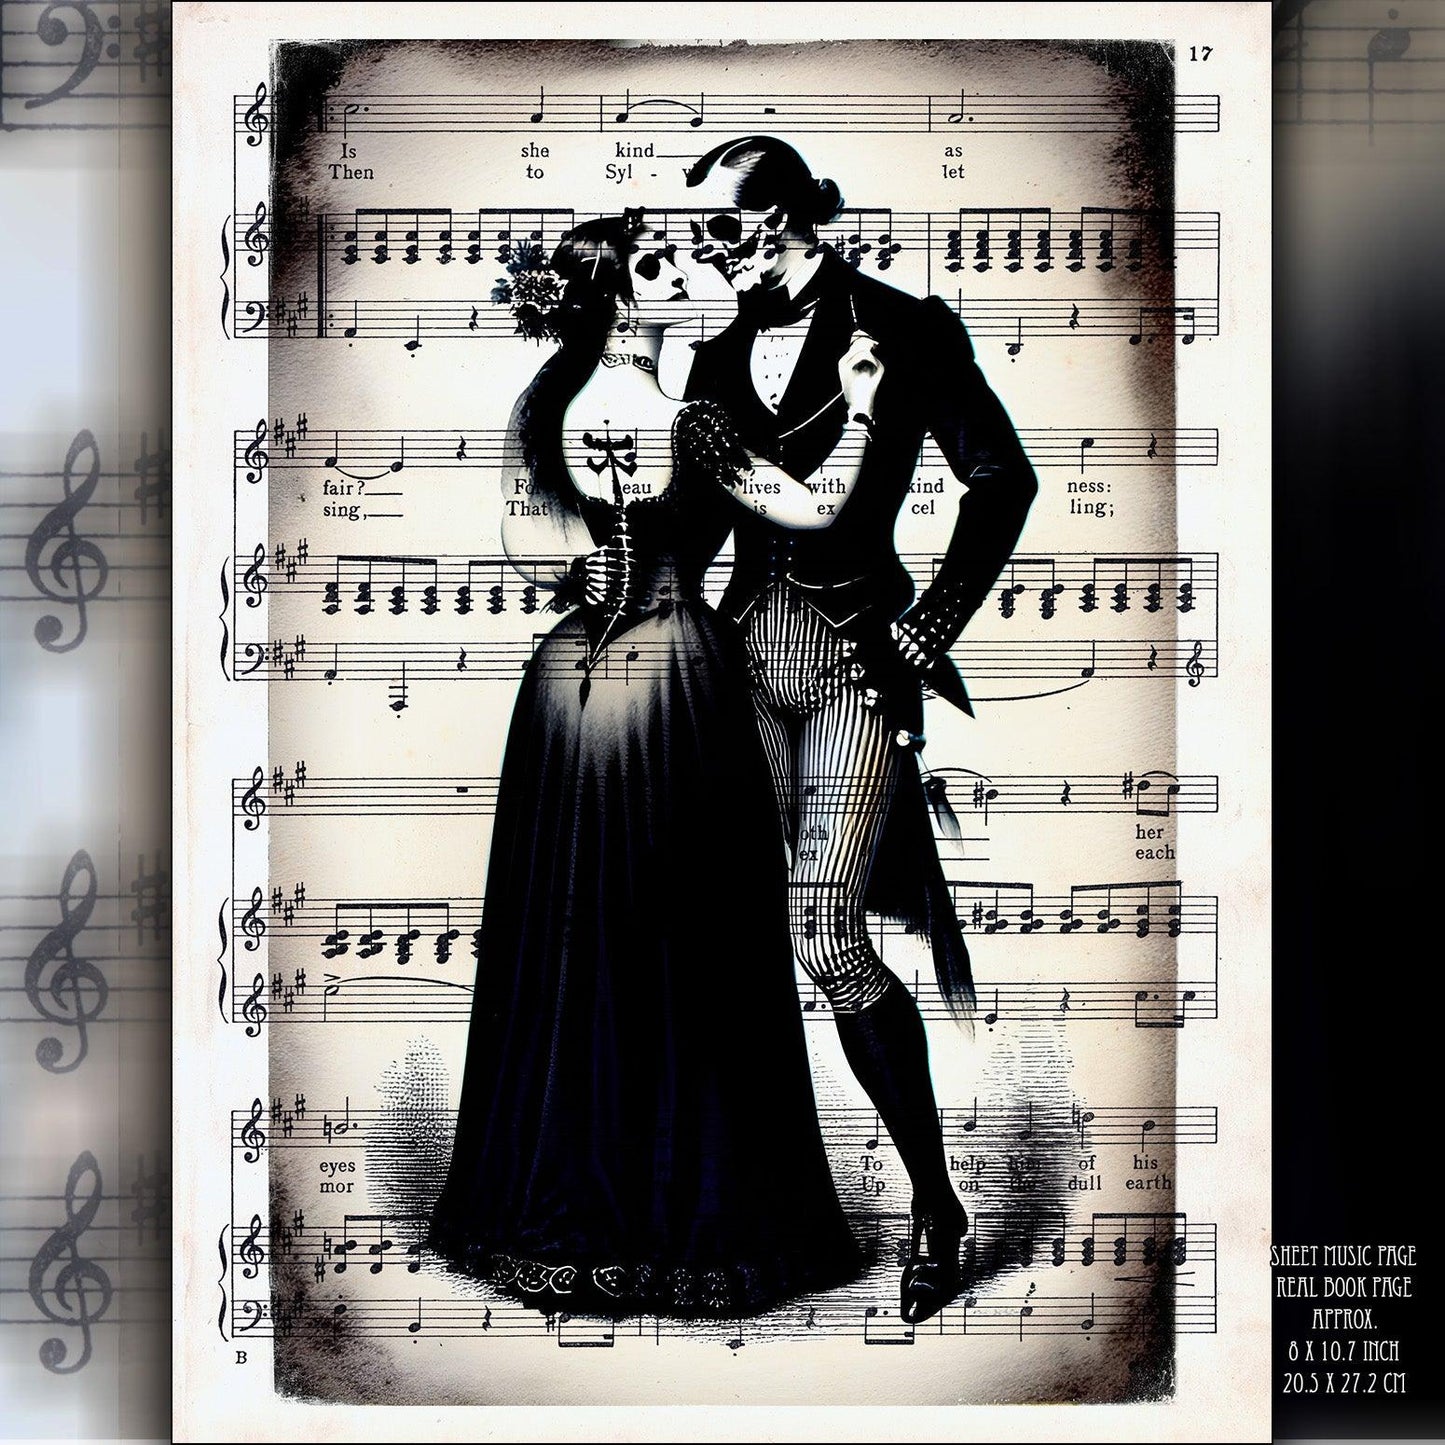 Dancing Skeletons Embrace Lovers: Victorian Gothic Decor and Dark Romance Art on Vintage Dictionary Page - ArtCursor